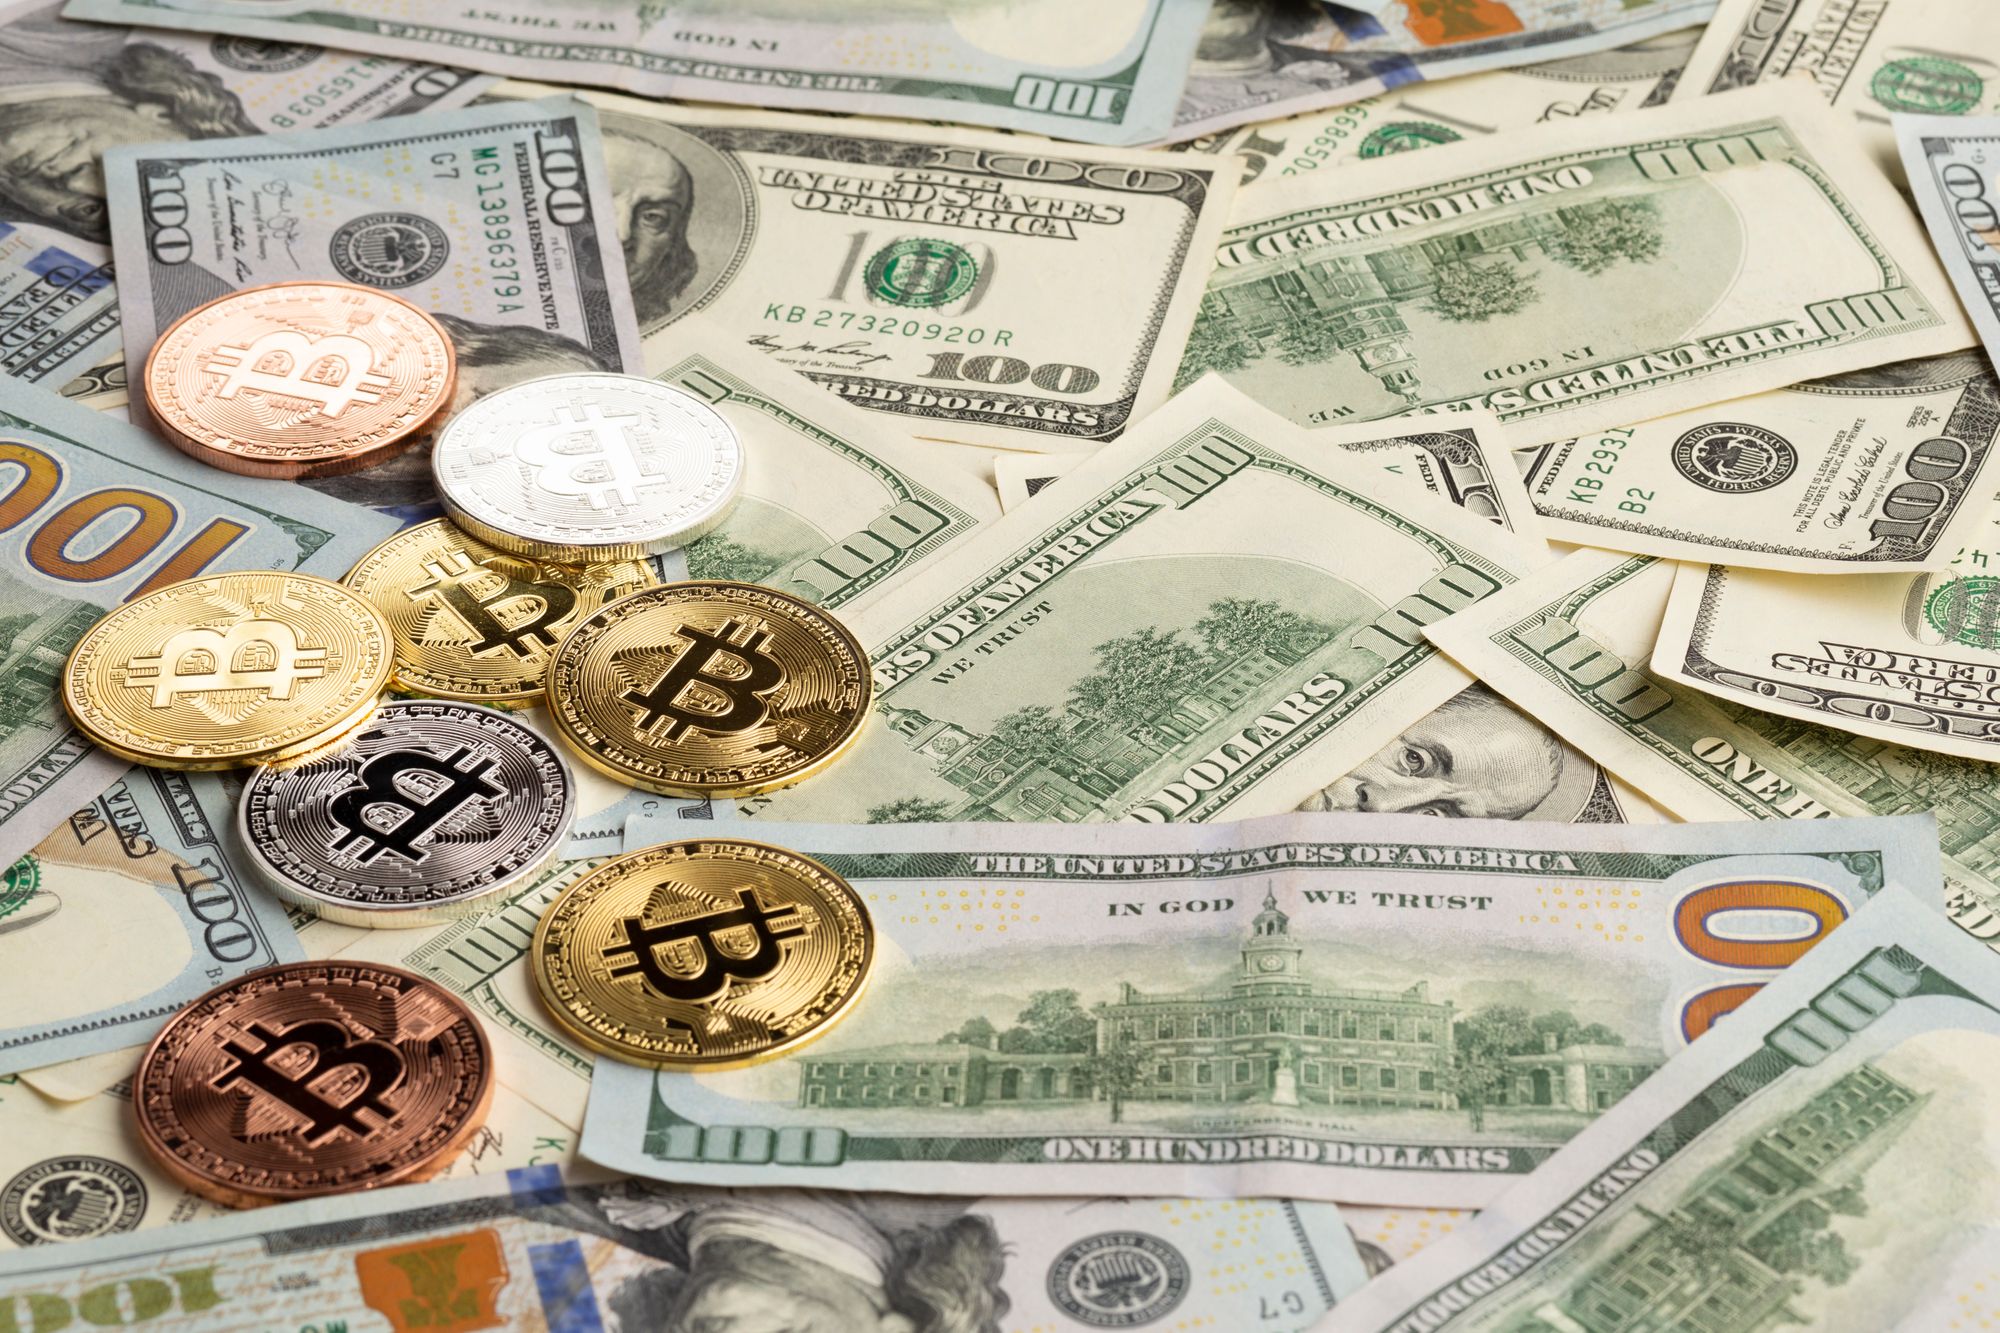 Peter Schiff: 'Digital Currencies Will Replace Fiat, but not Bitcoin'